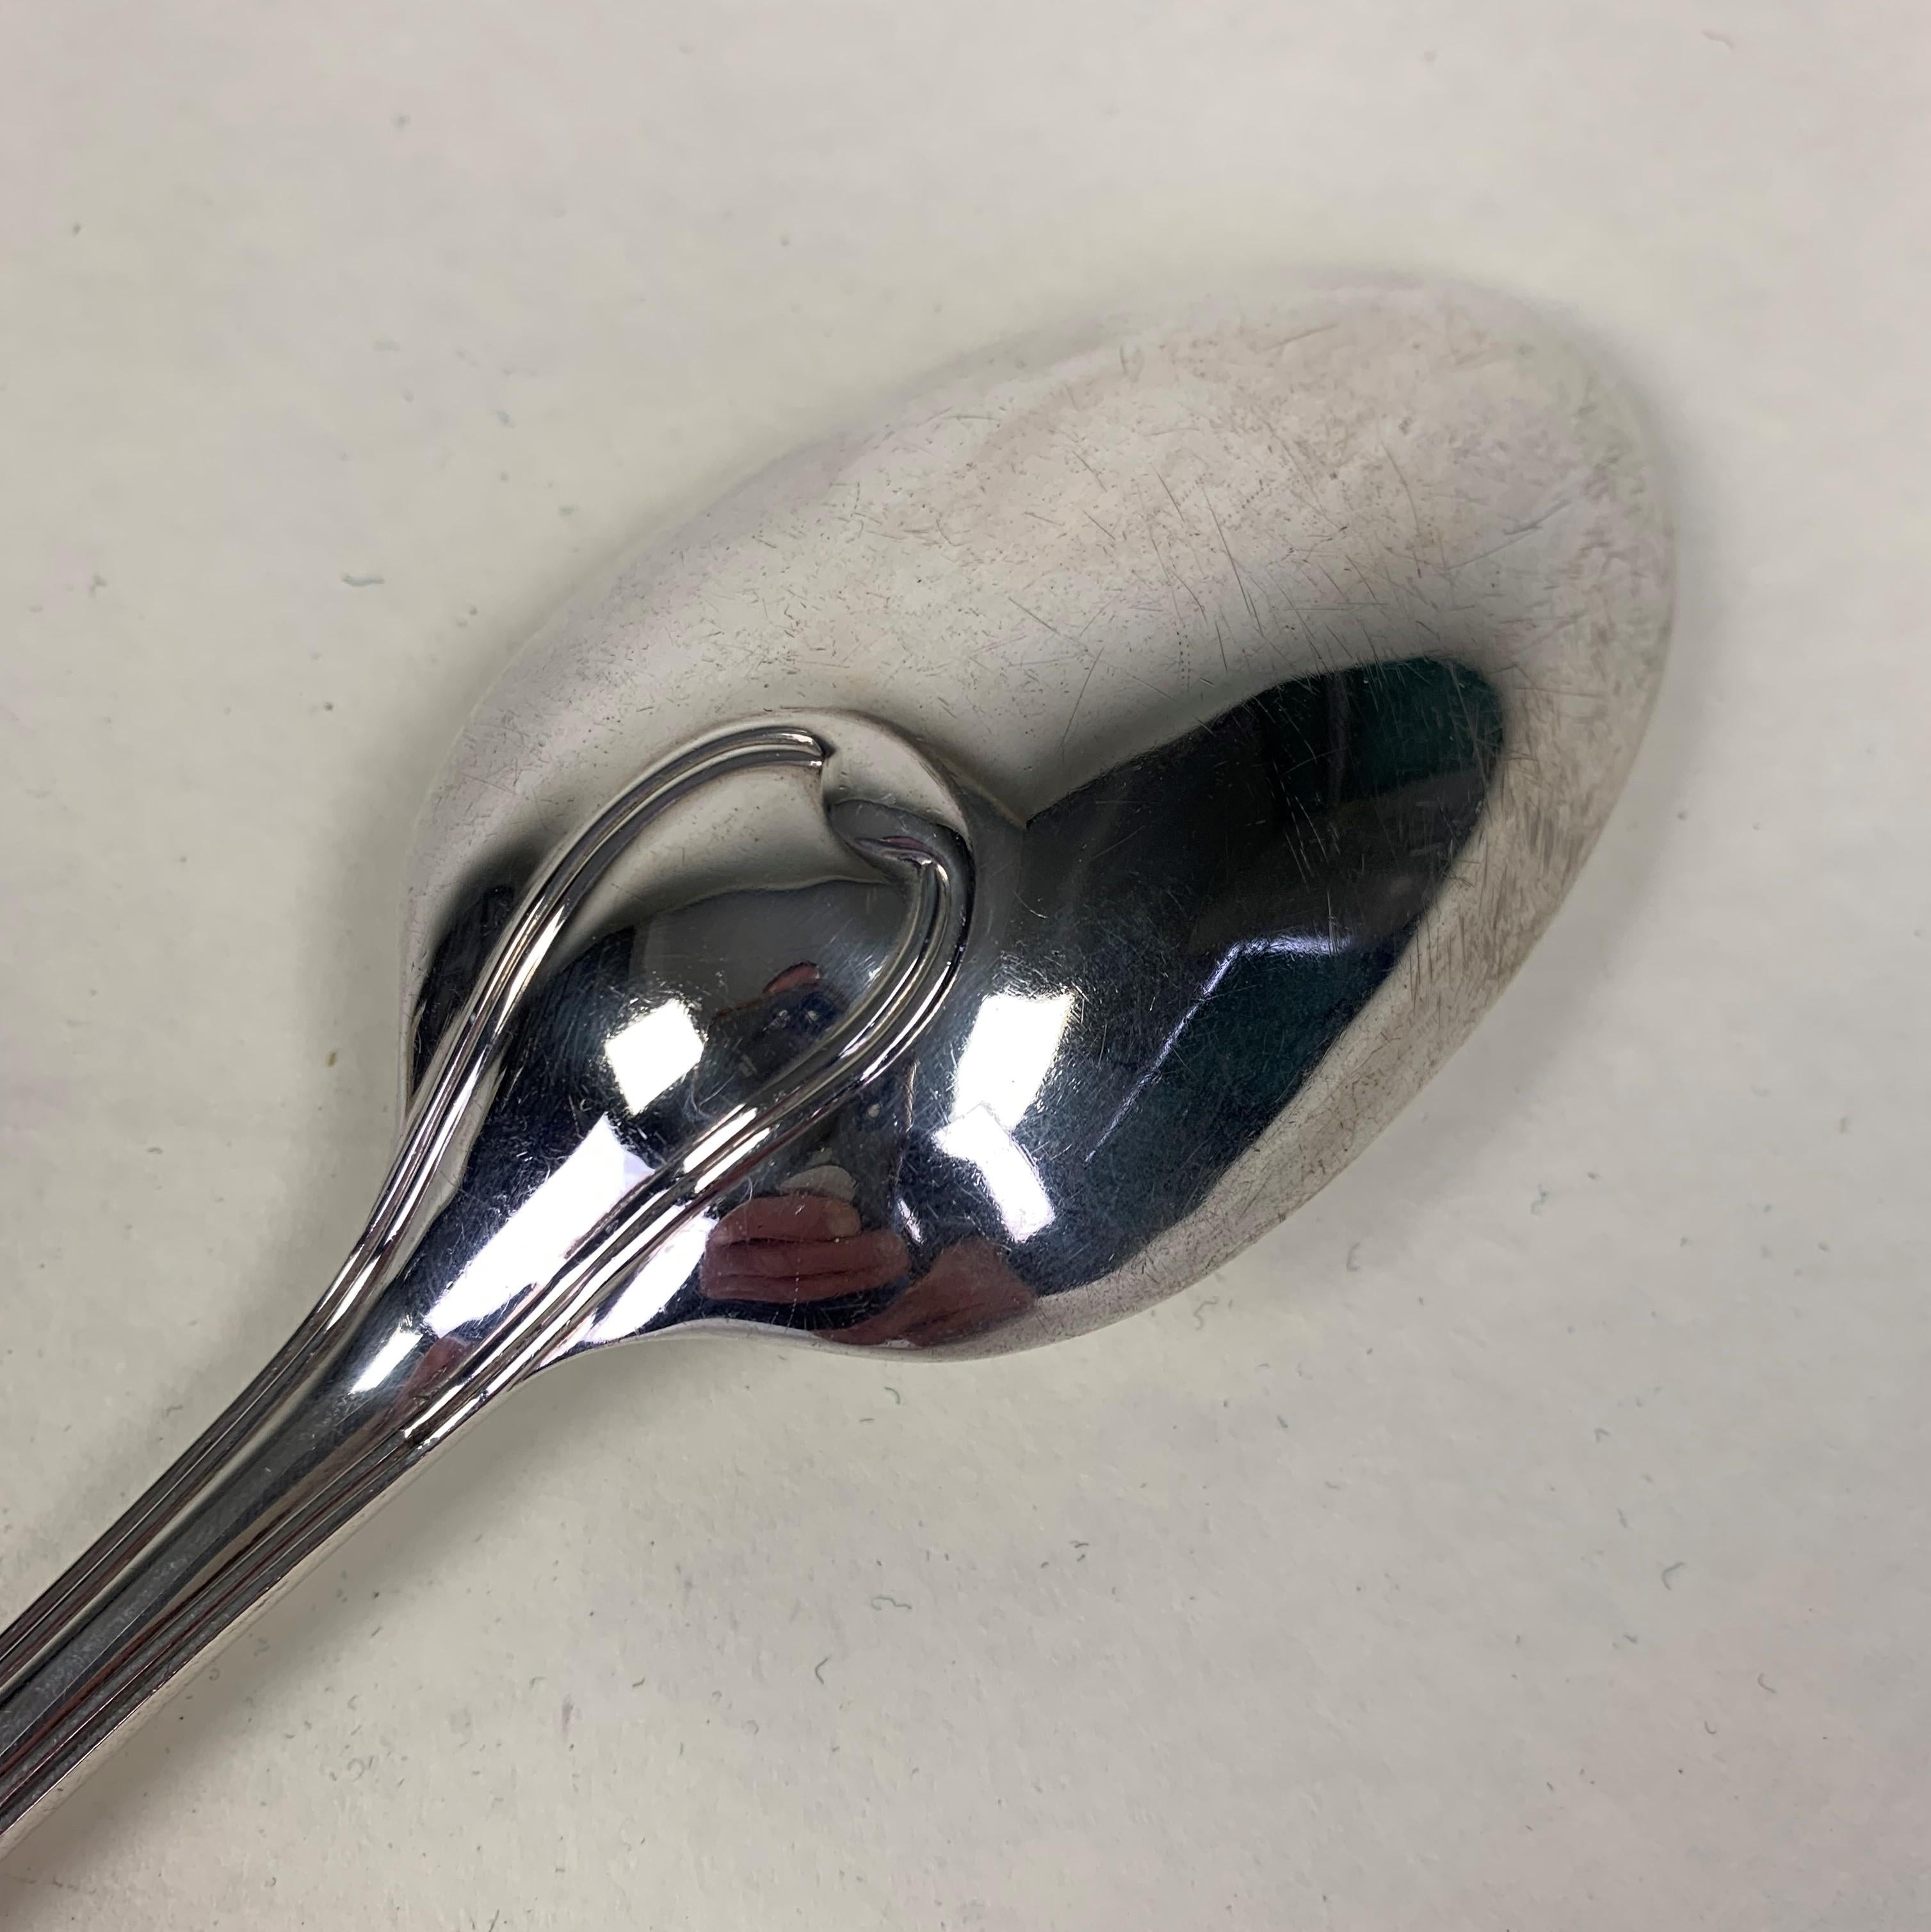 Large silver basting or serving spoon, London 1901 by Charles & Richard Comyns. In Excellent condition with almost no sign of ware or damage. Engraved with a fascinating crest of a simple raised hand with open palm.
200 grams. Size: 312mm long.